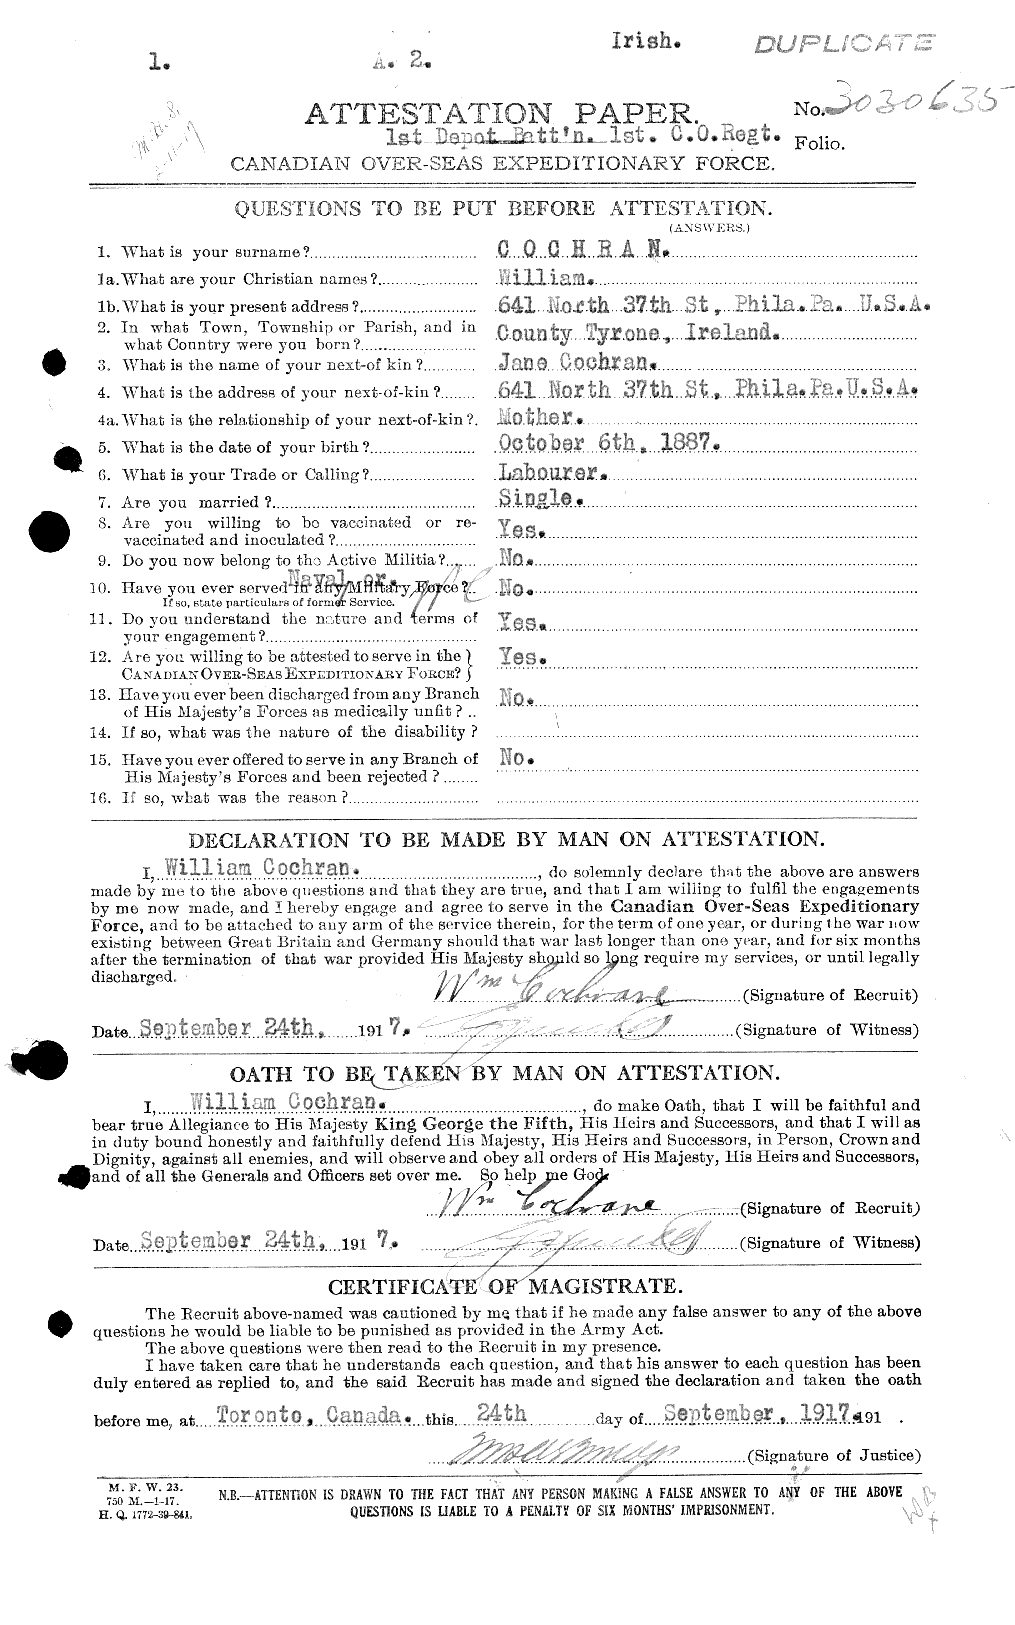 Personnel Records of the First World War - CEF 026498a